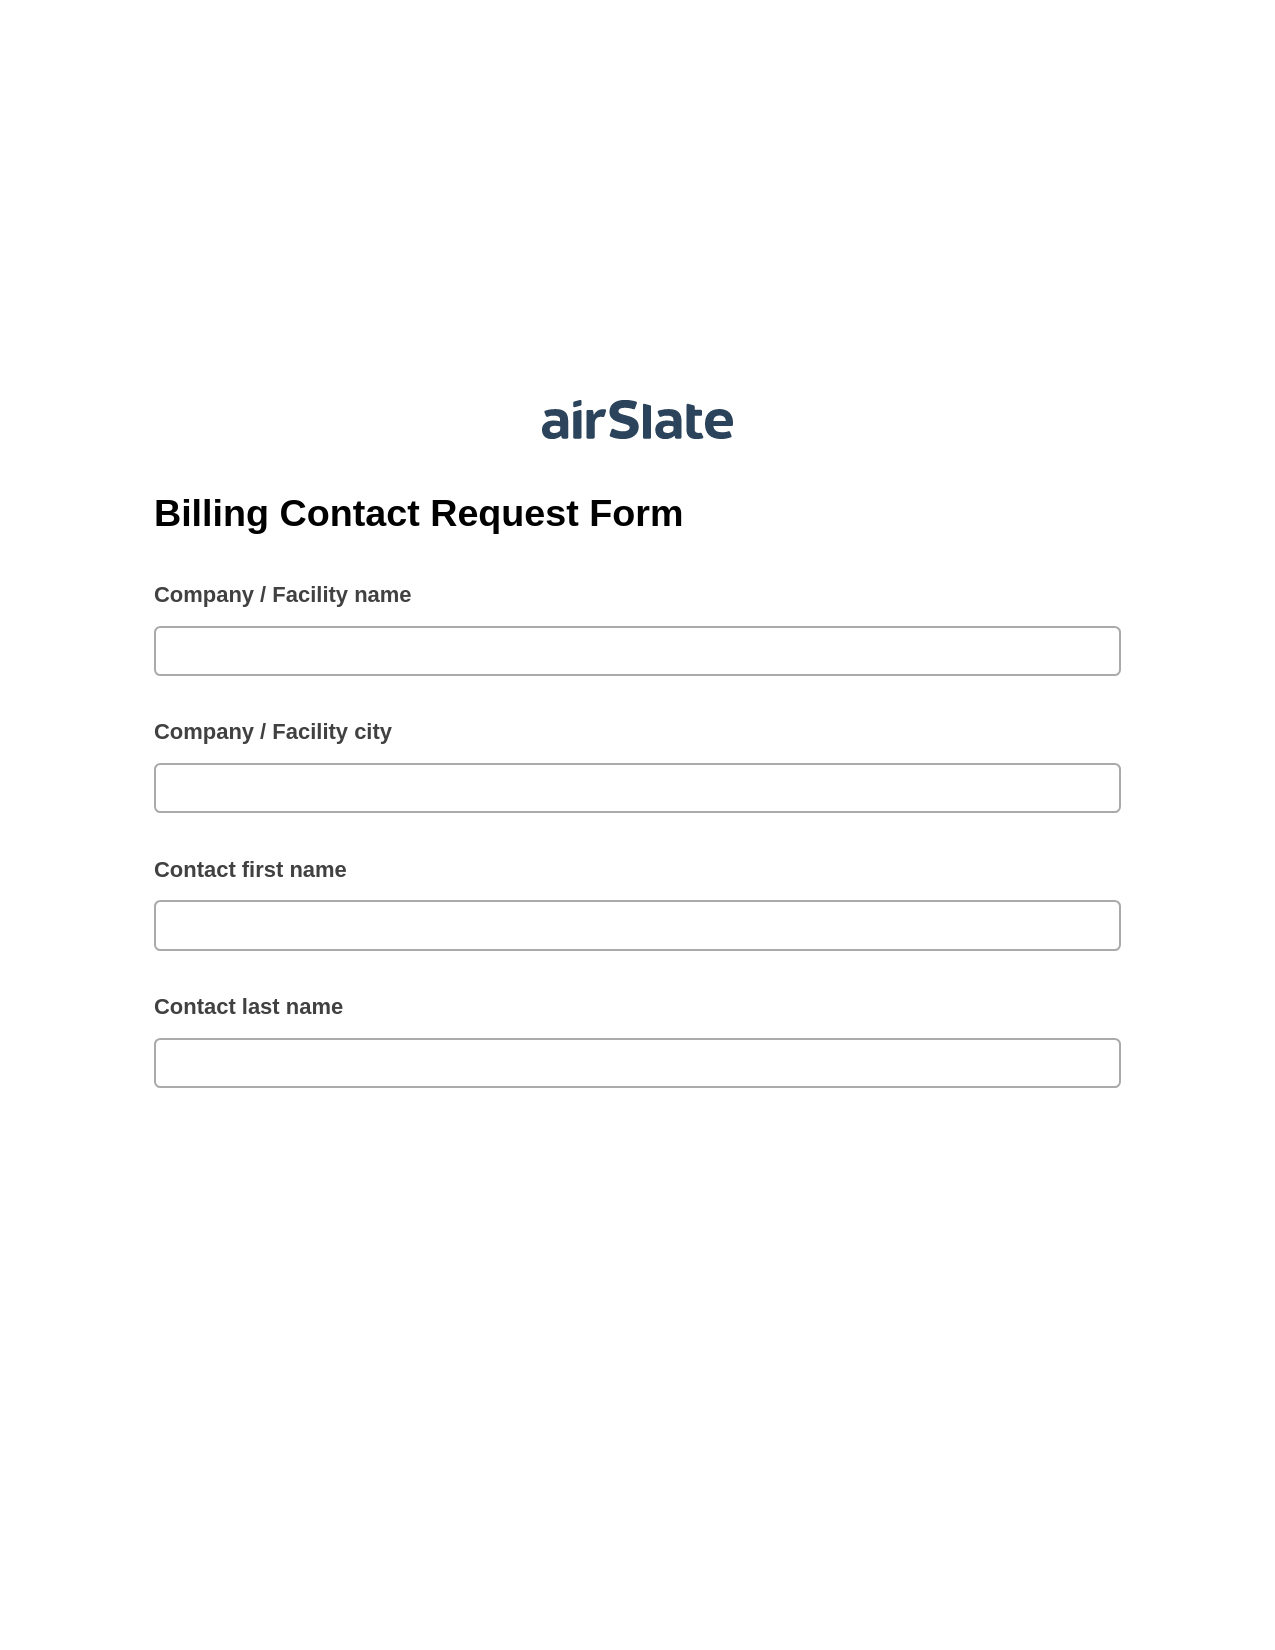 Multirole Billing Contact Request Form Pre-fill Slate from MS Dynamics 365 Records Bot, Text Message Notification Bot, Webhook Postfinish Bot